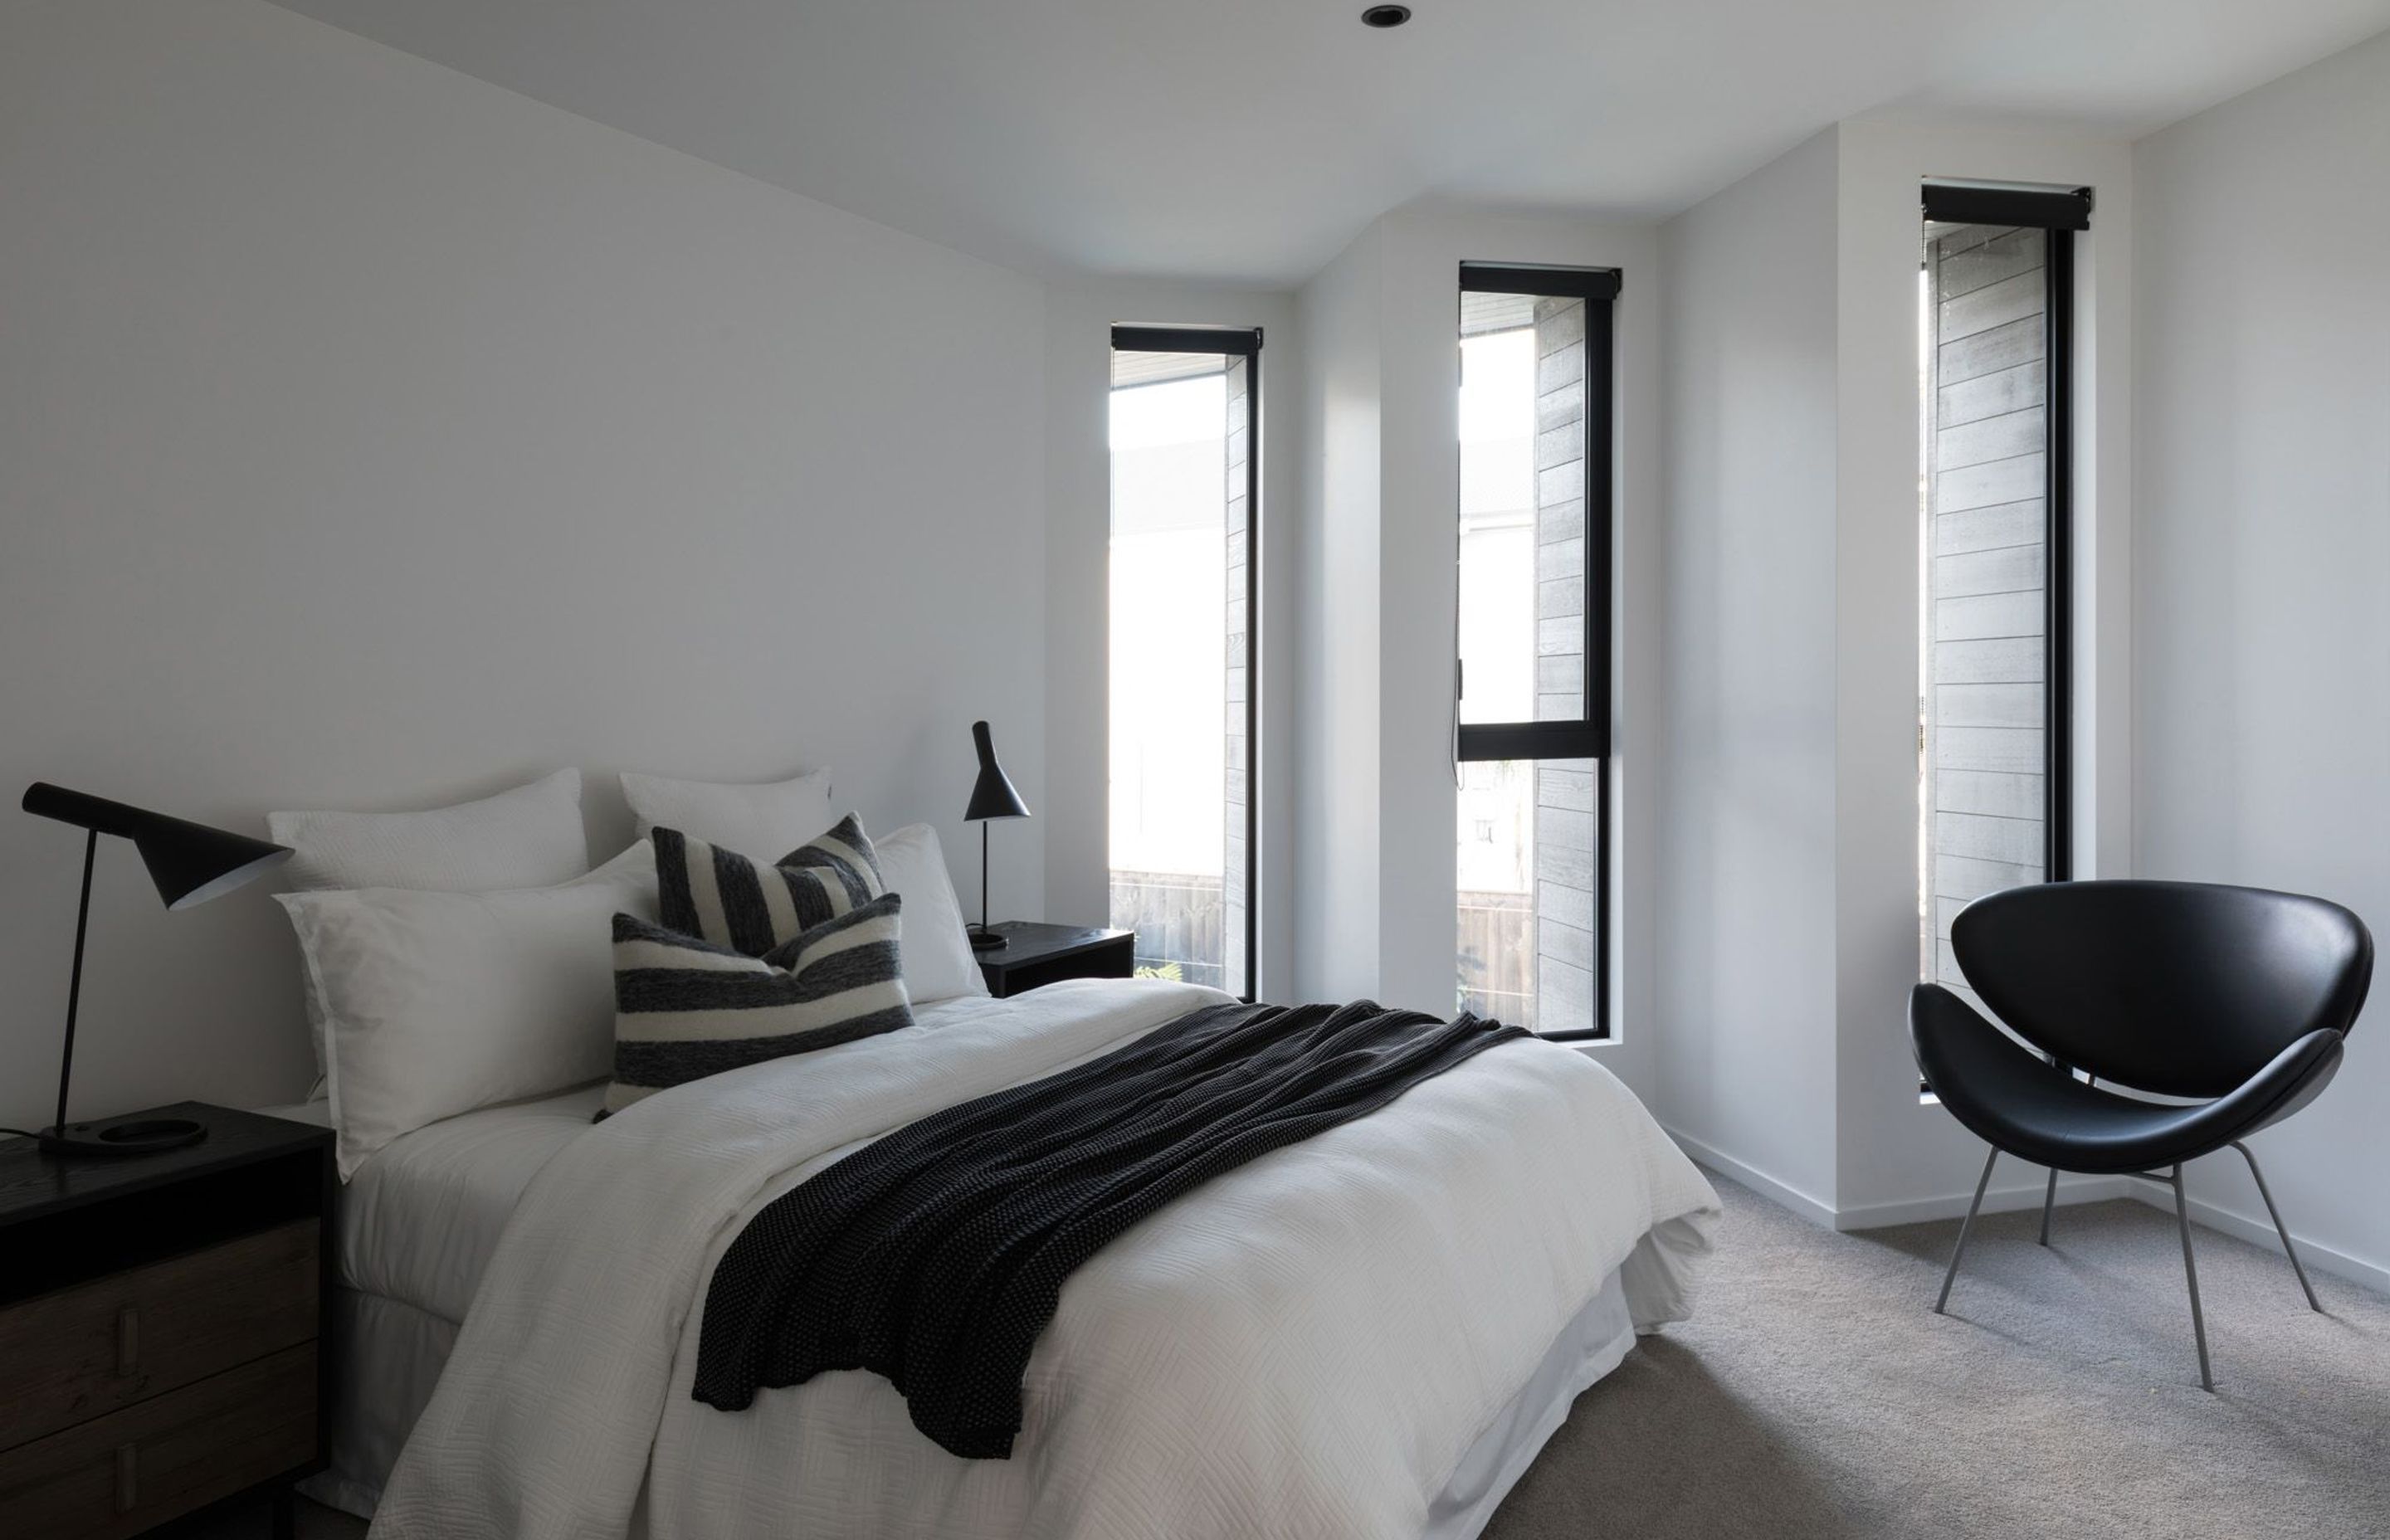 The black-and-white colour scheme continues throughout the interior of Takapuna House, seen here in one of the bedrooms.